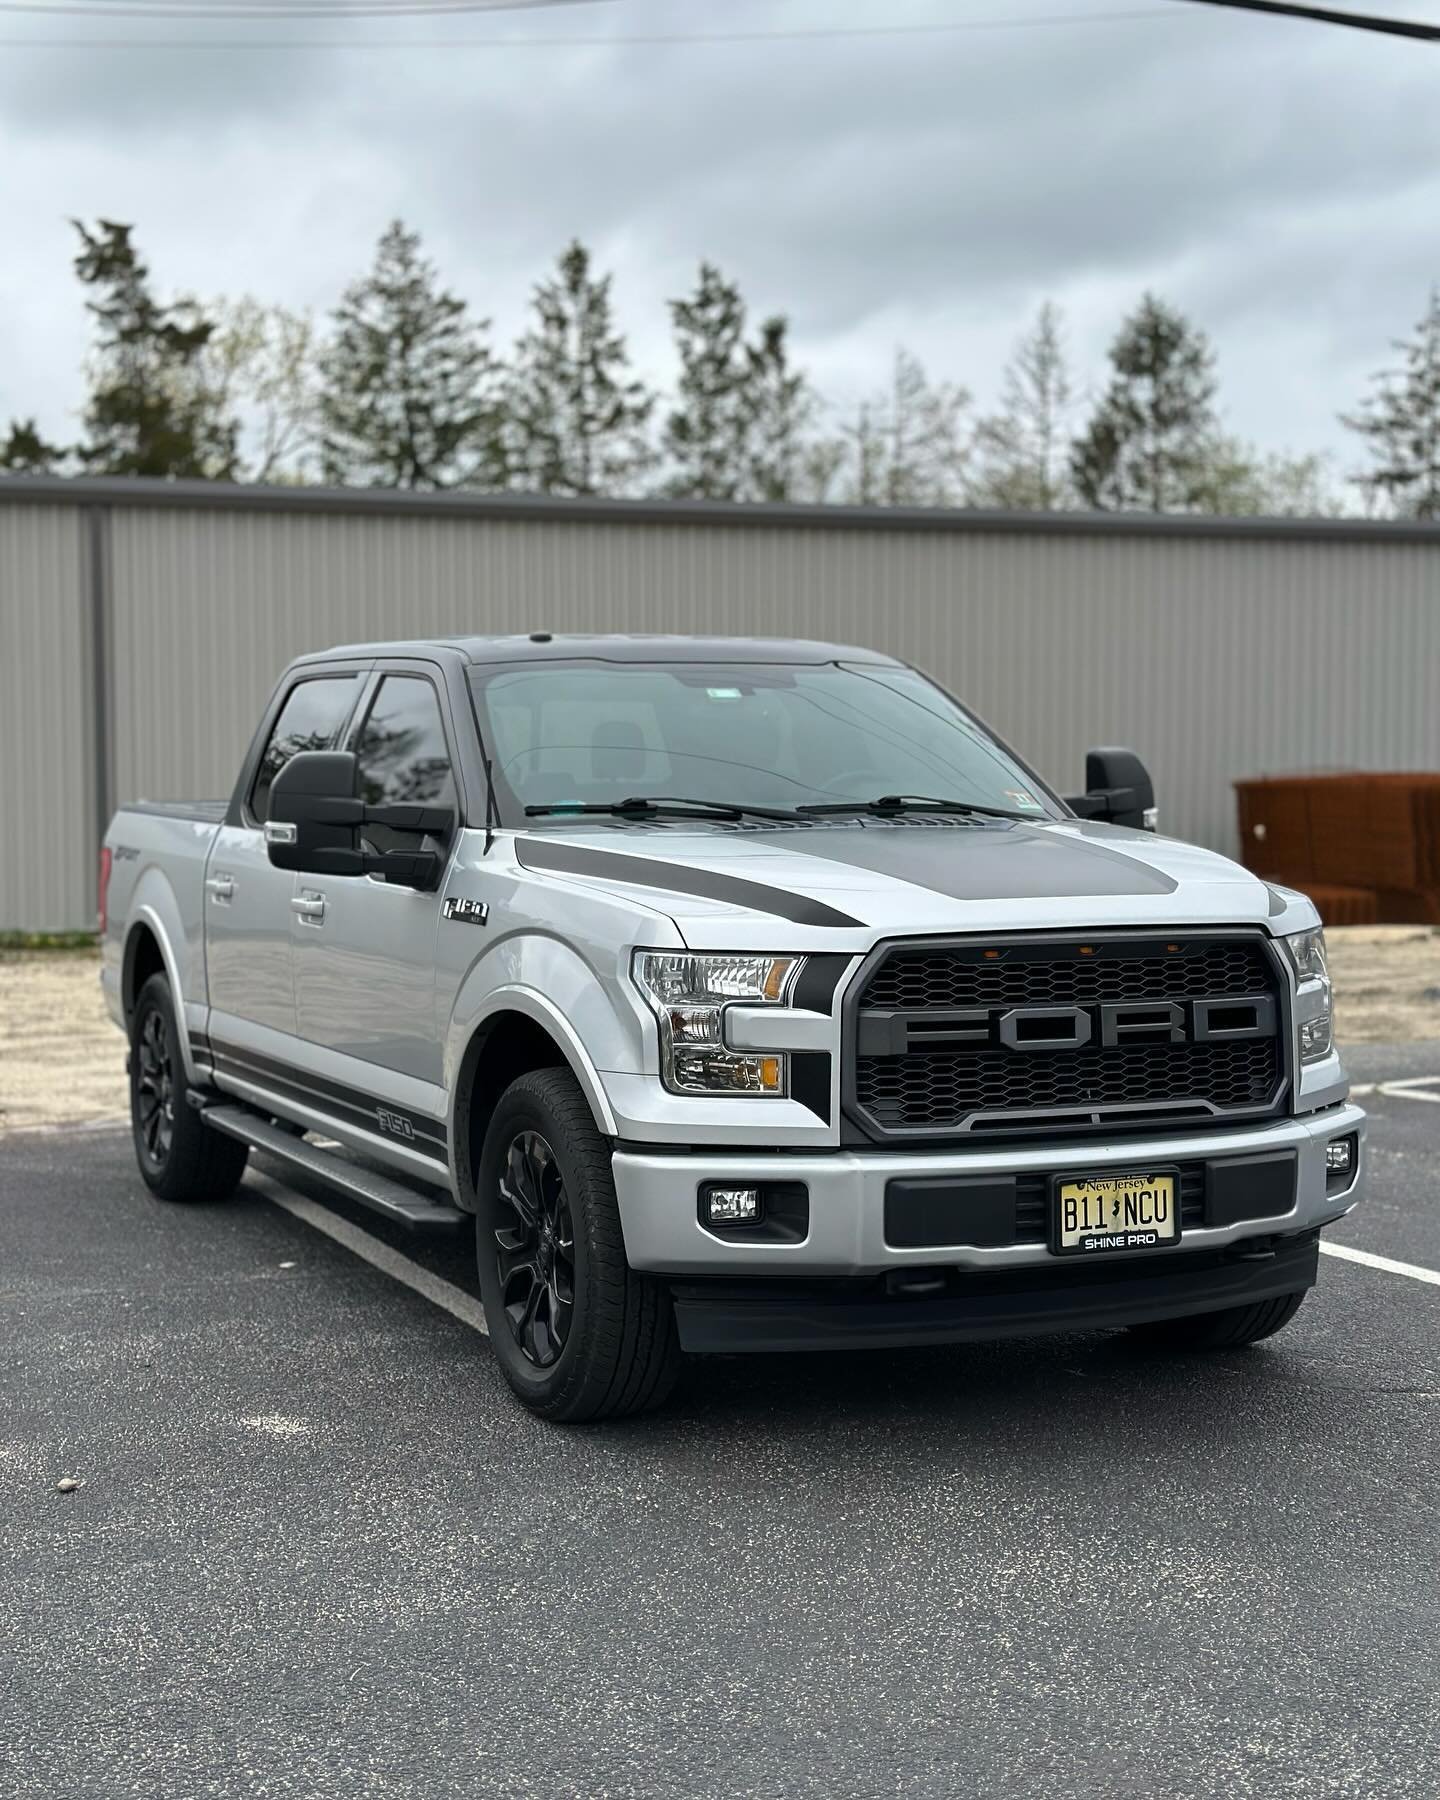 Protect Your Investment &trade;️

This Ford F-150 wanted the top half of their roof wrapped black to line up with the bed cover and match the hood stripes. This gives the truck a clean OEM+ look 👌

🔽 Find Us Here 

📱 (609) 287-8944
📧 shinepronj@g